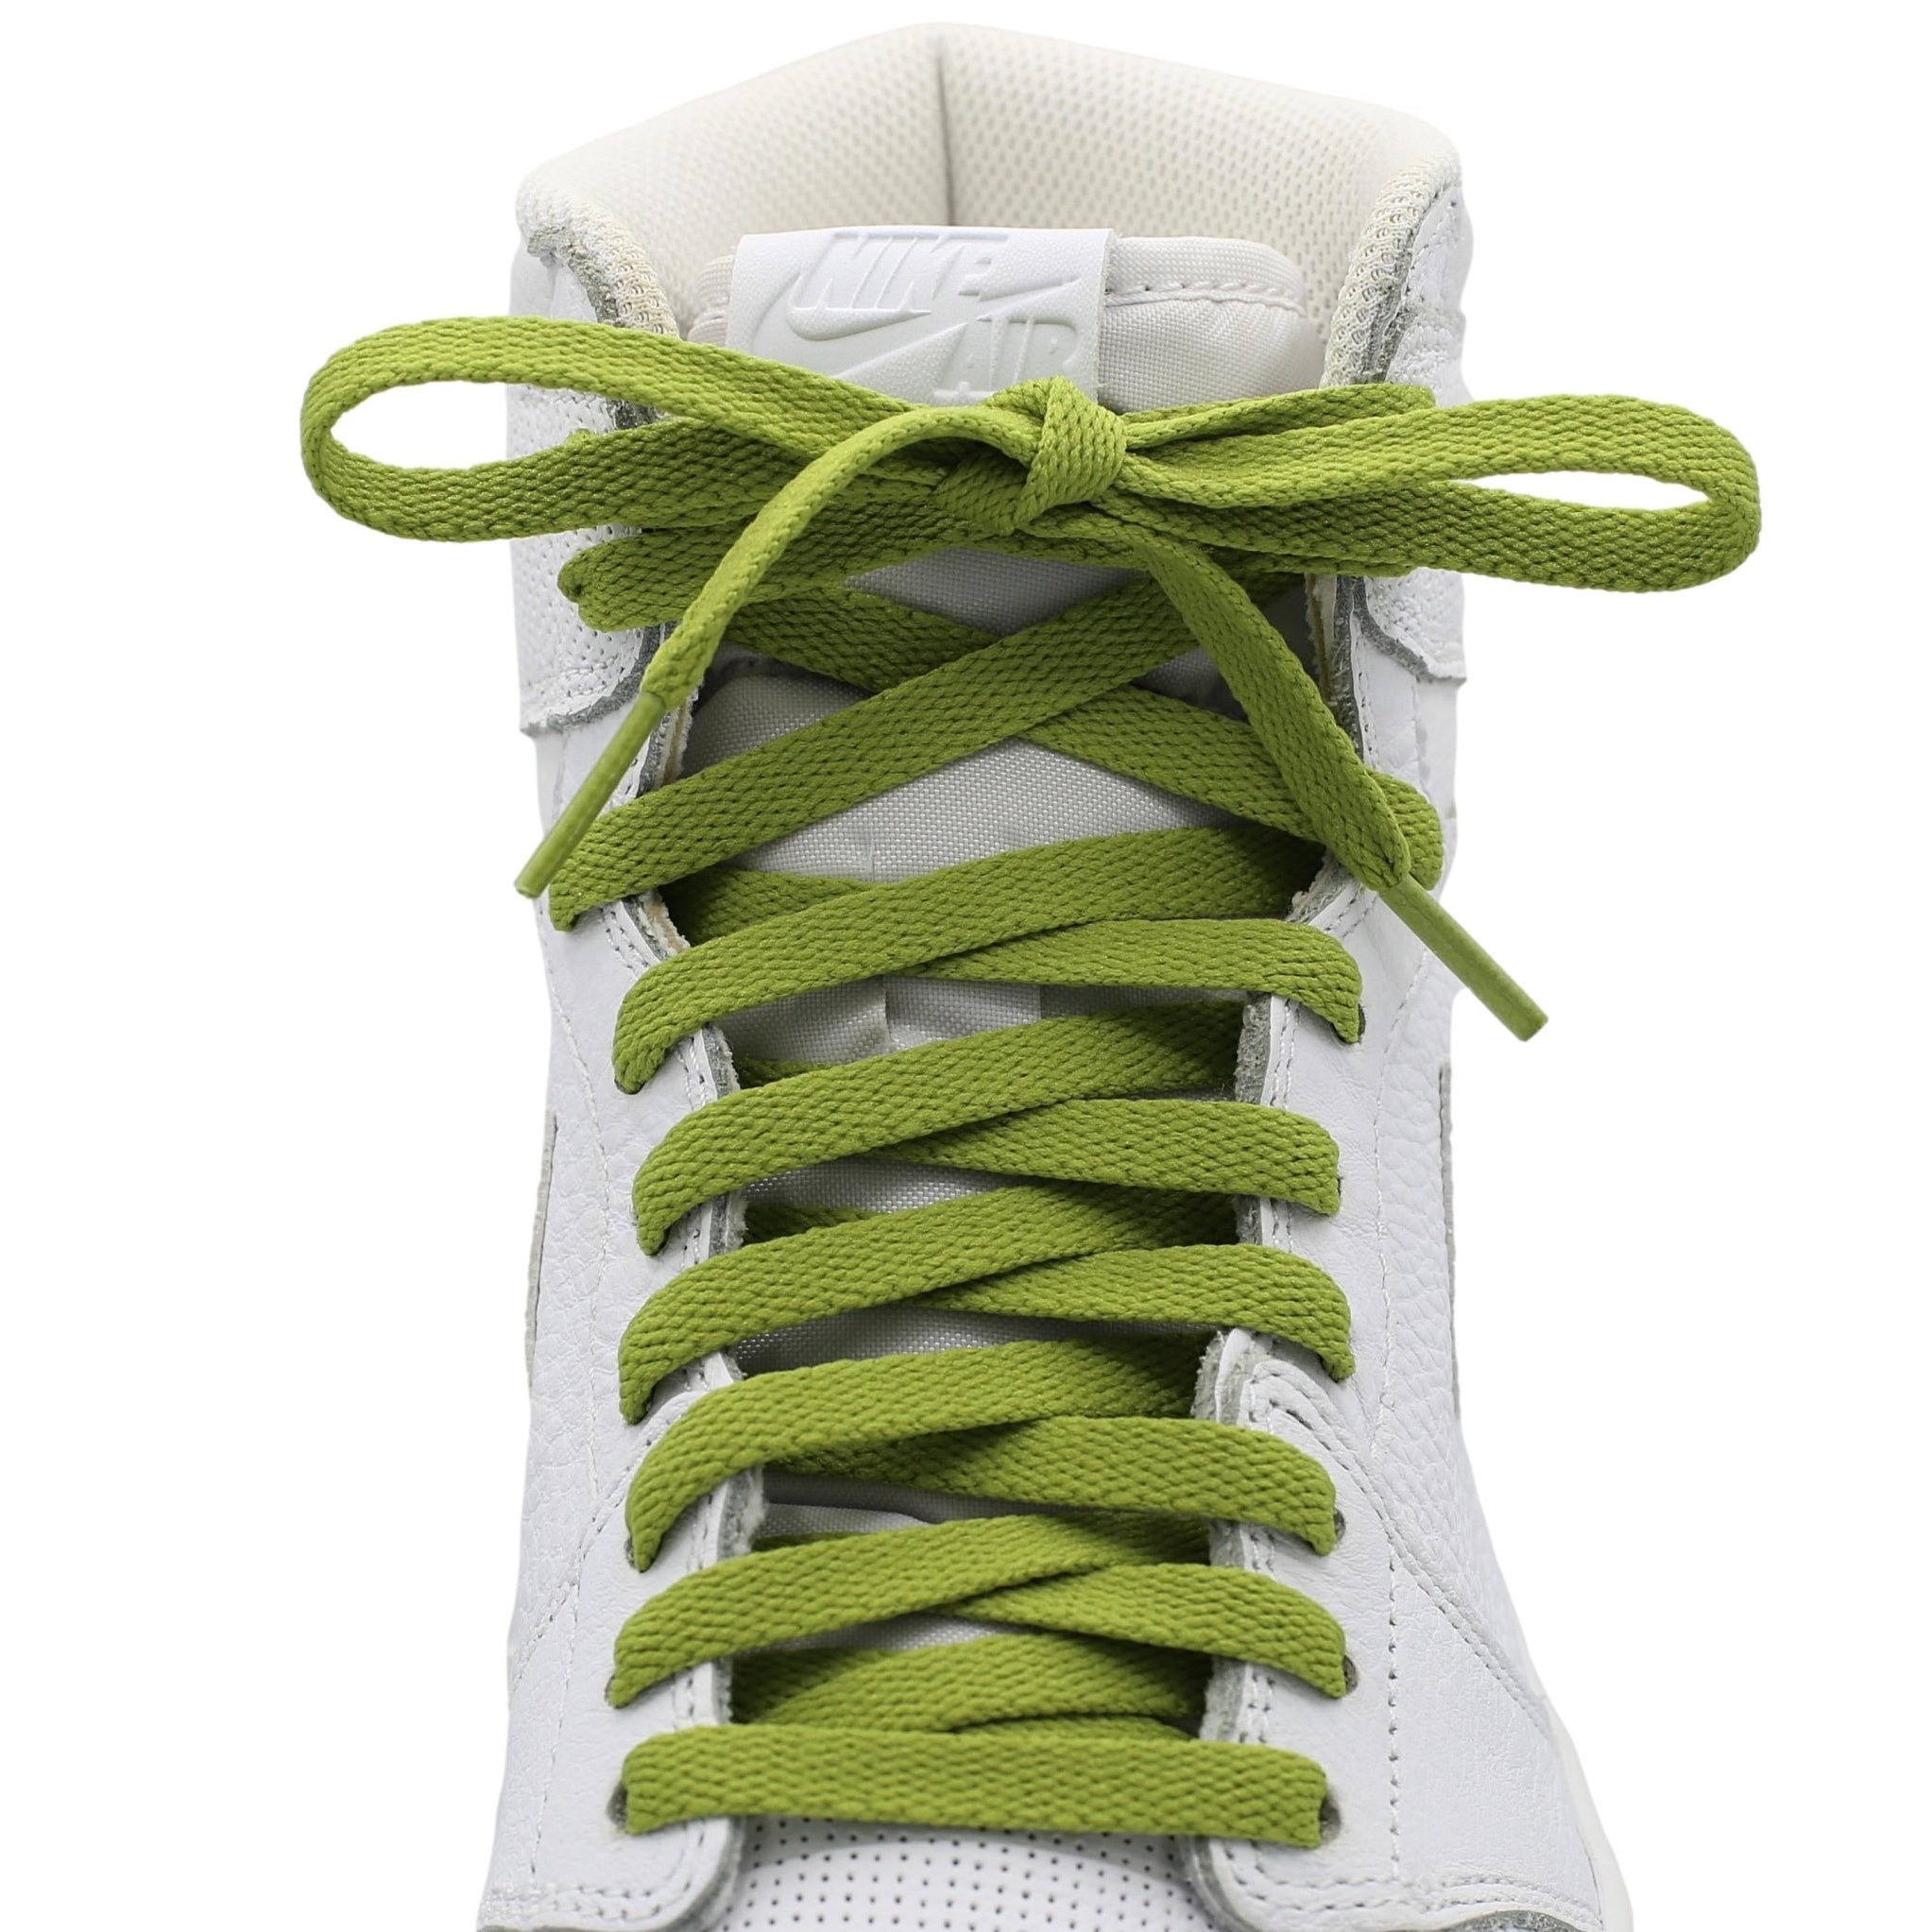 Jordan And Dunk Replacement Shoe Laces - Shoe Lace Supply